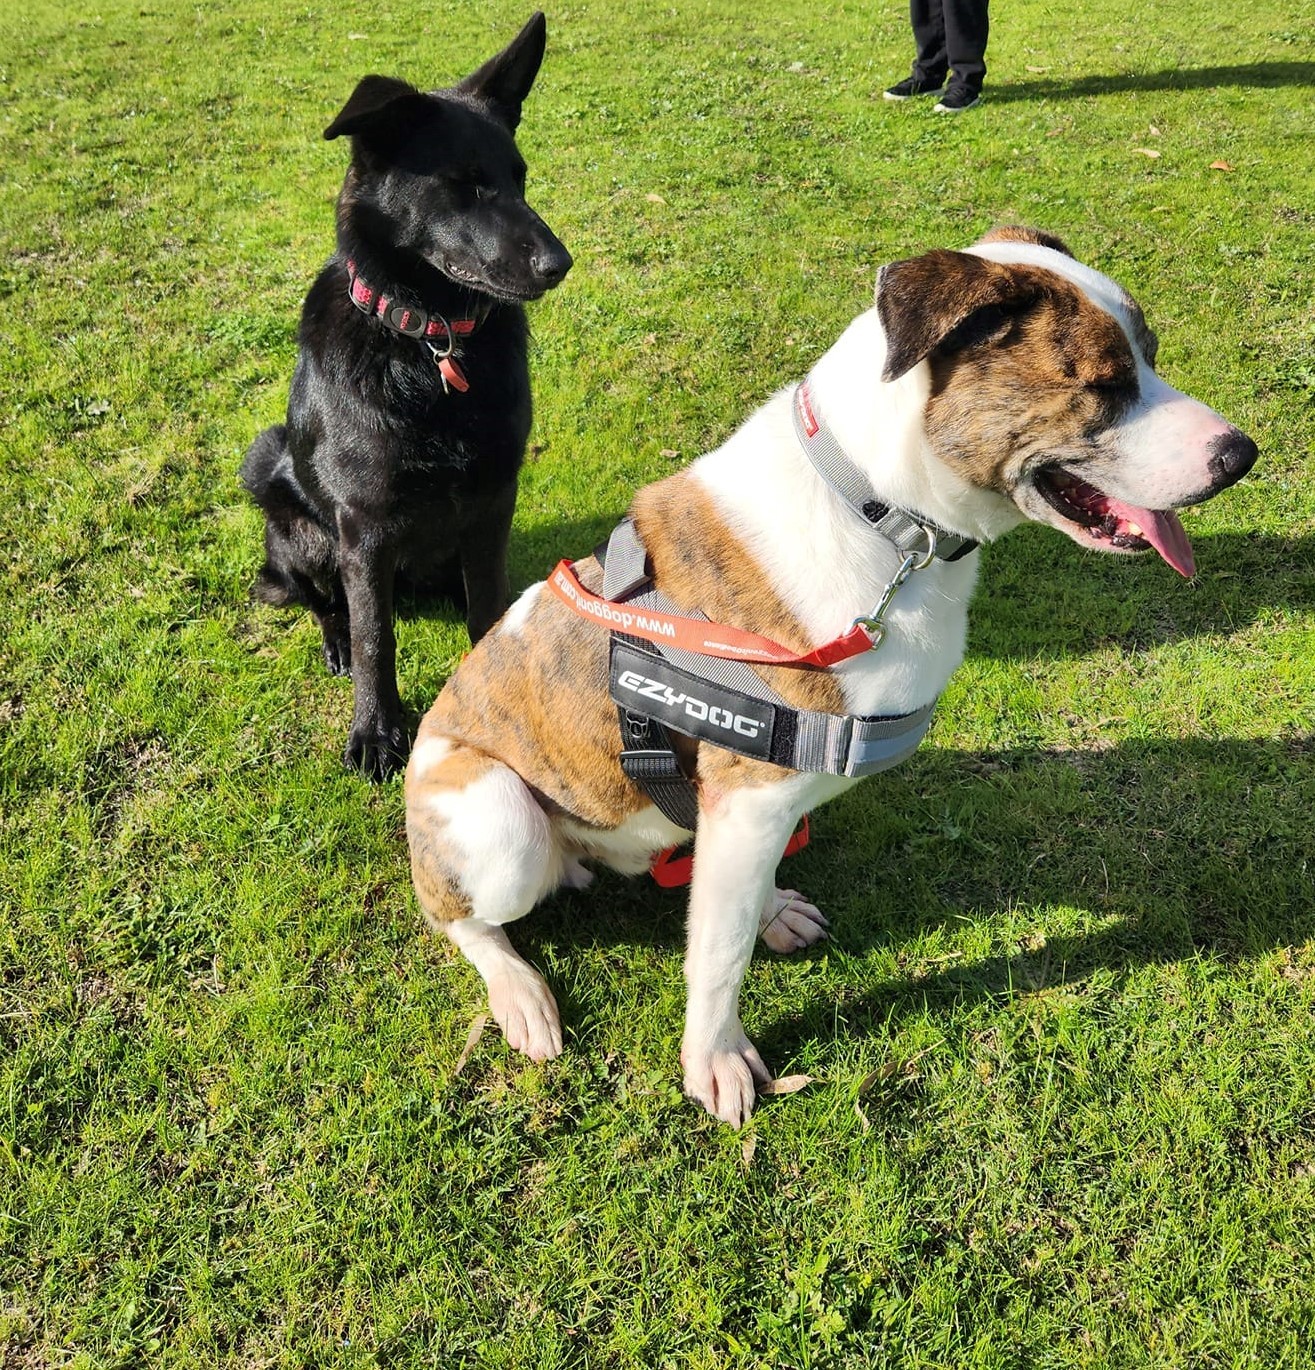 Black dog and Brown and white dog wearing ezydog accessories